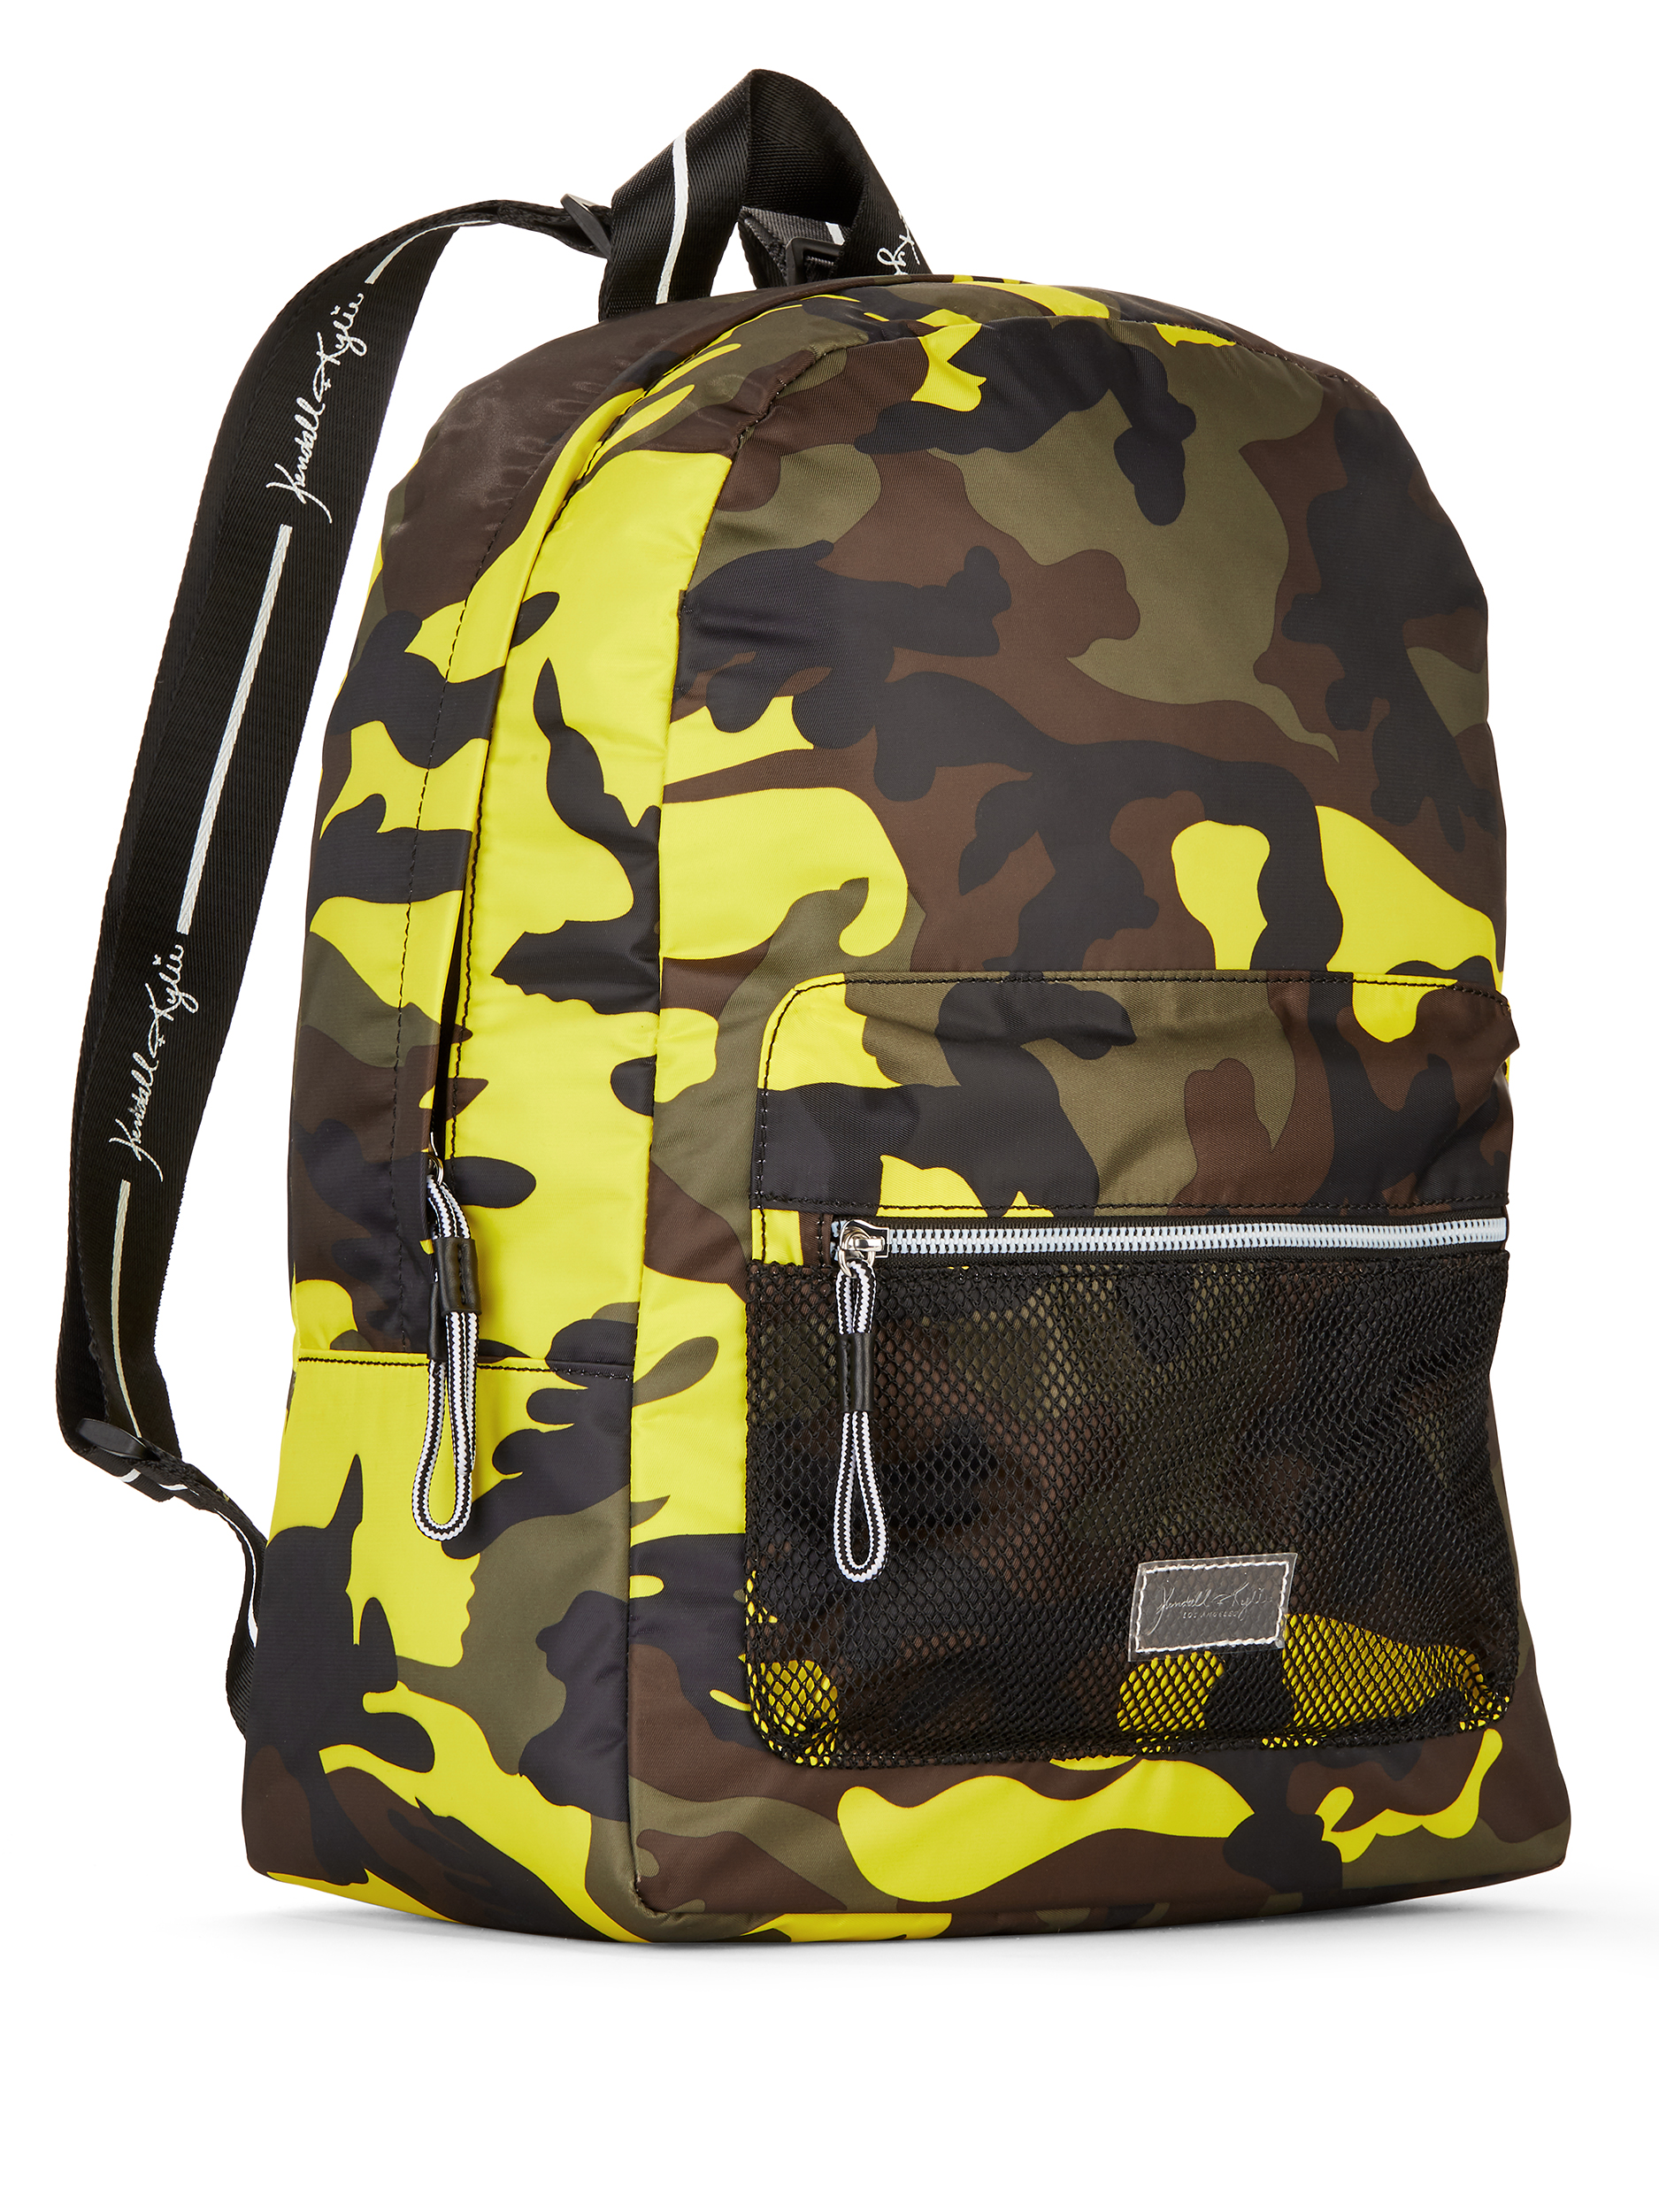 Kendall + Kylie for Walmart Multi Camo Large Backpack - image 3 of 5